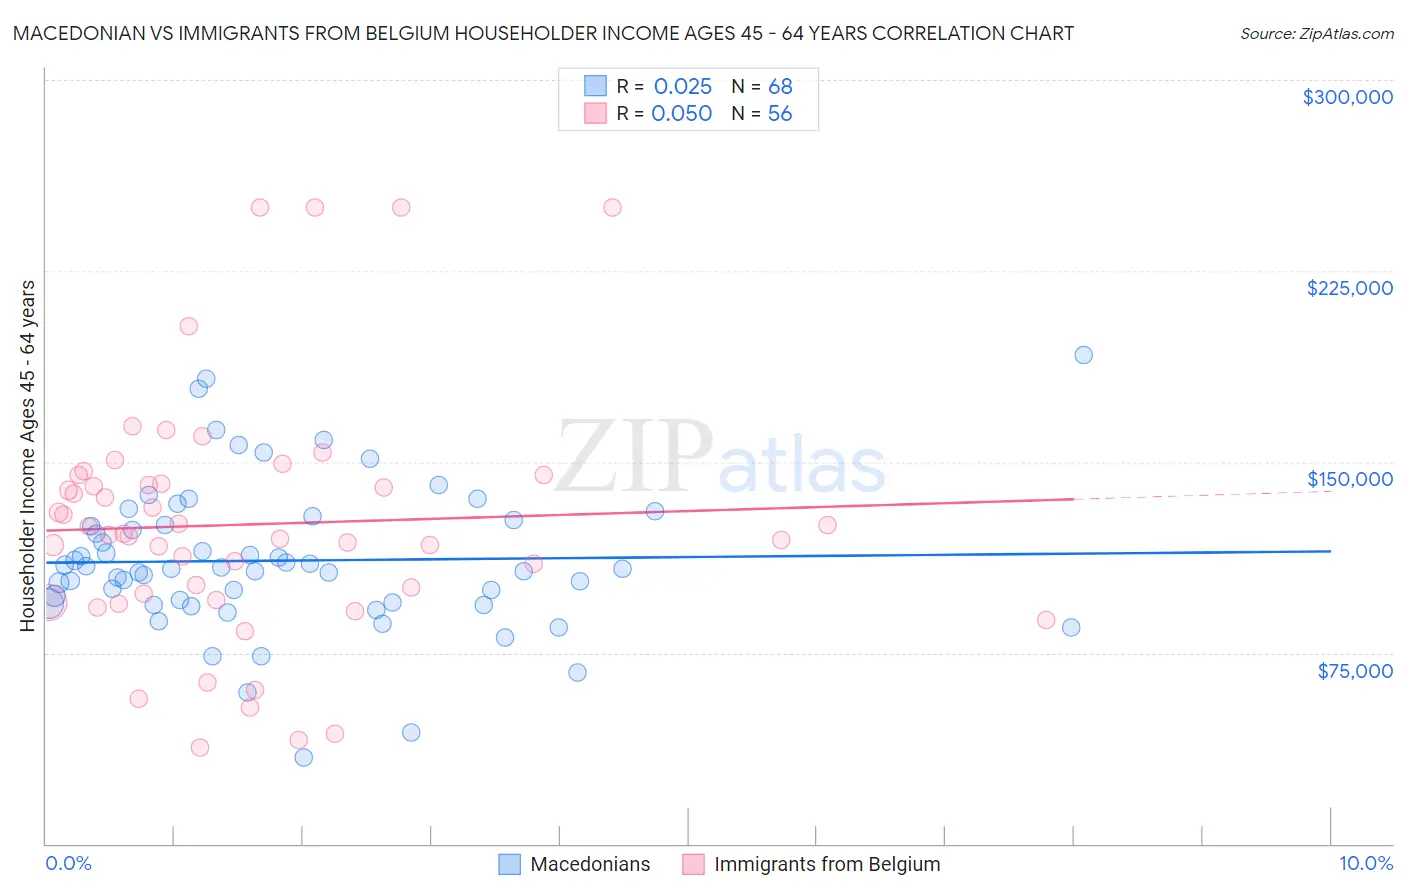 Macedonian vs Immigrants from Belgium Householder Income Ages 45 - 64 years